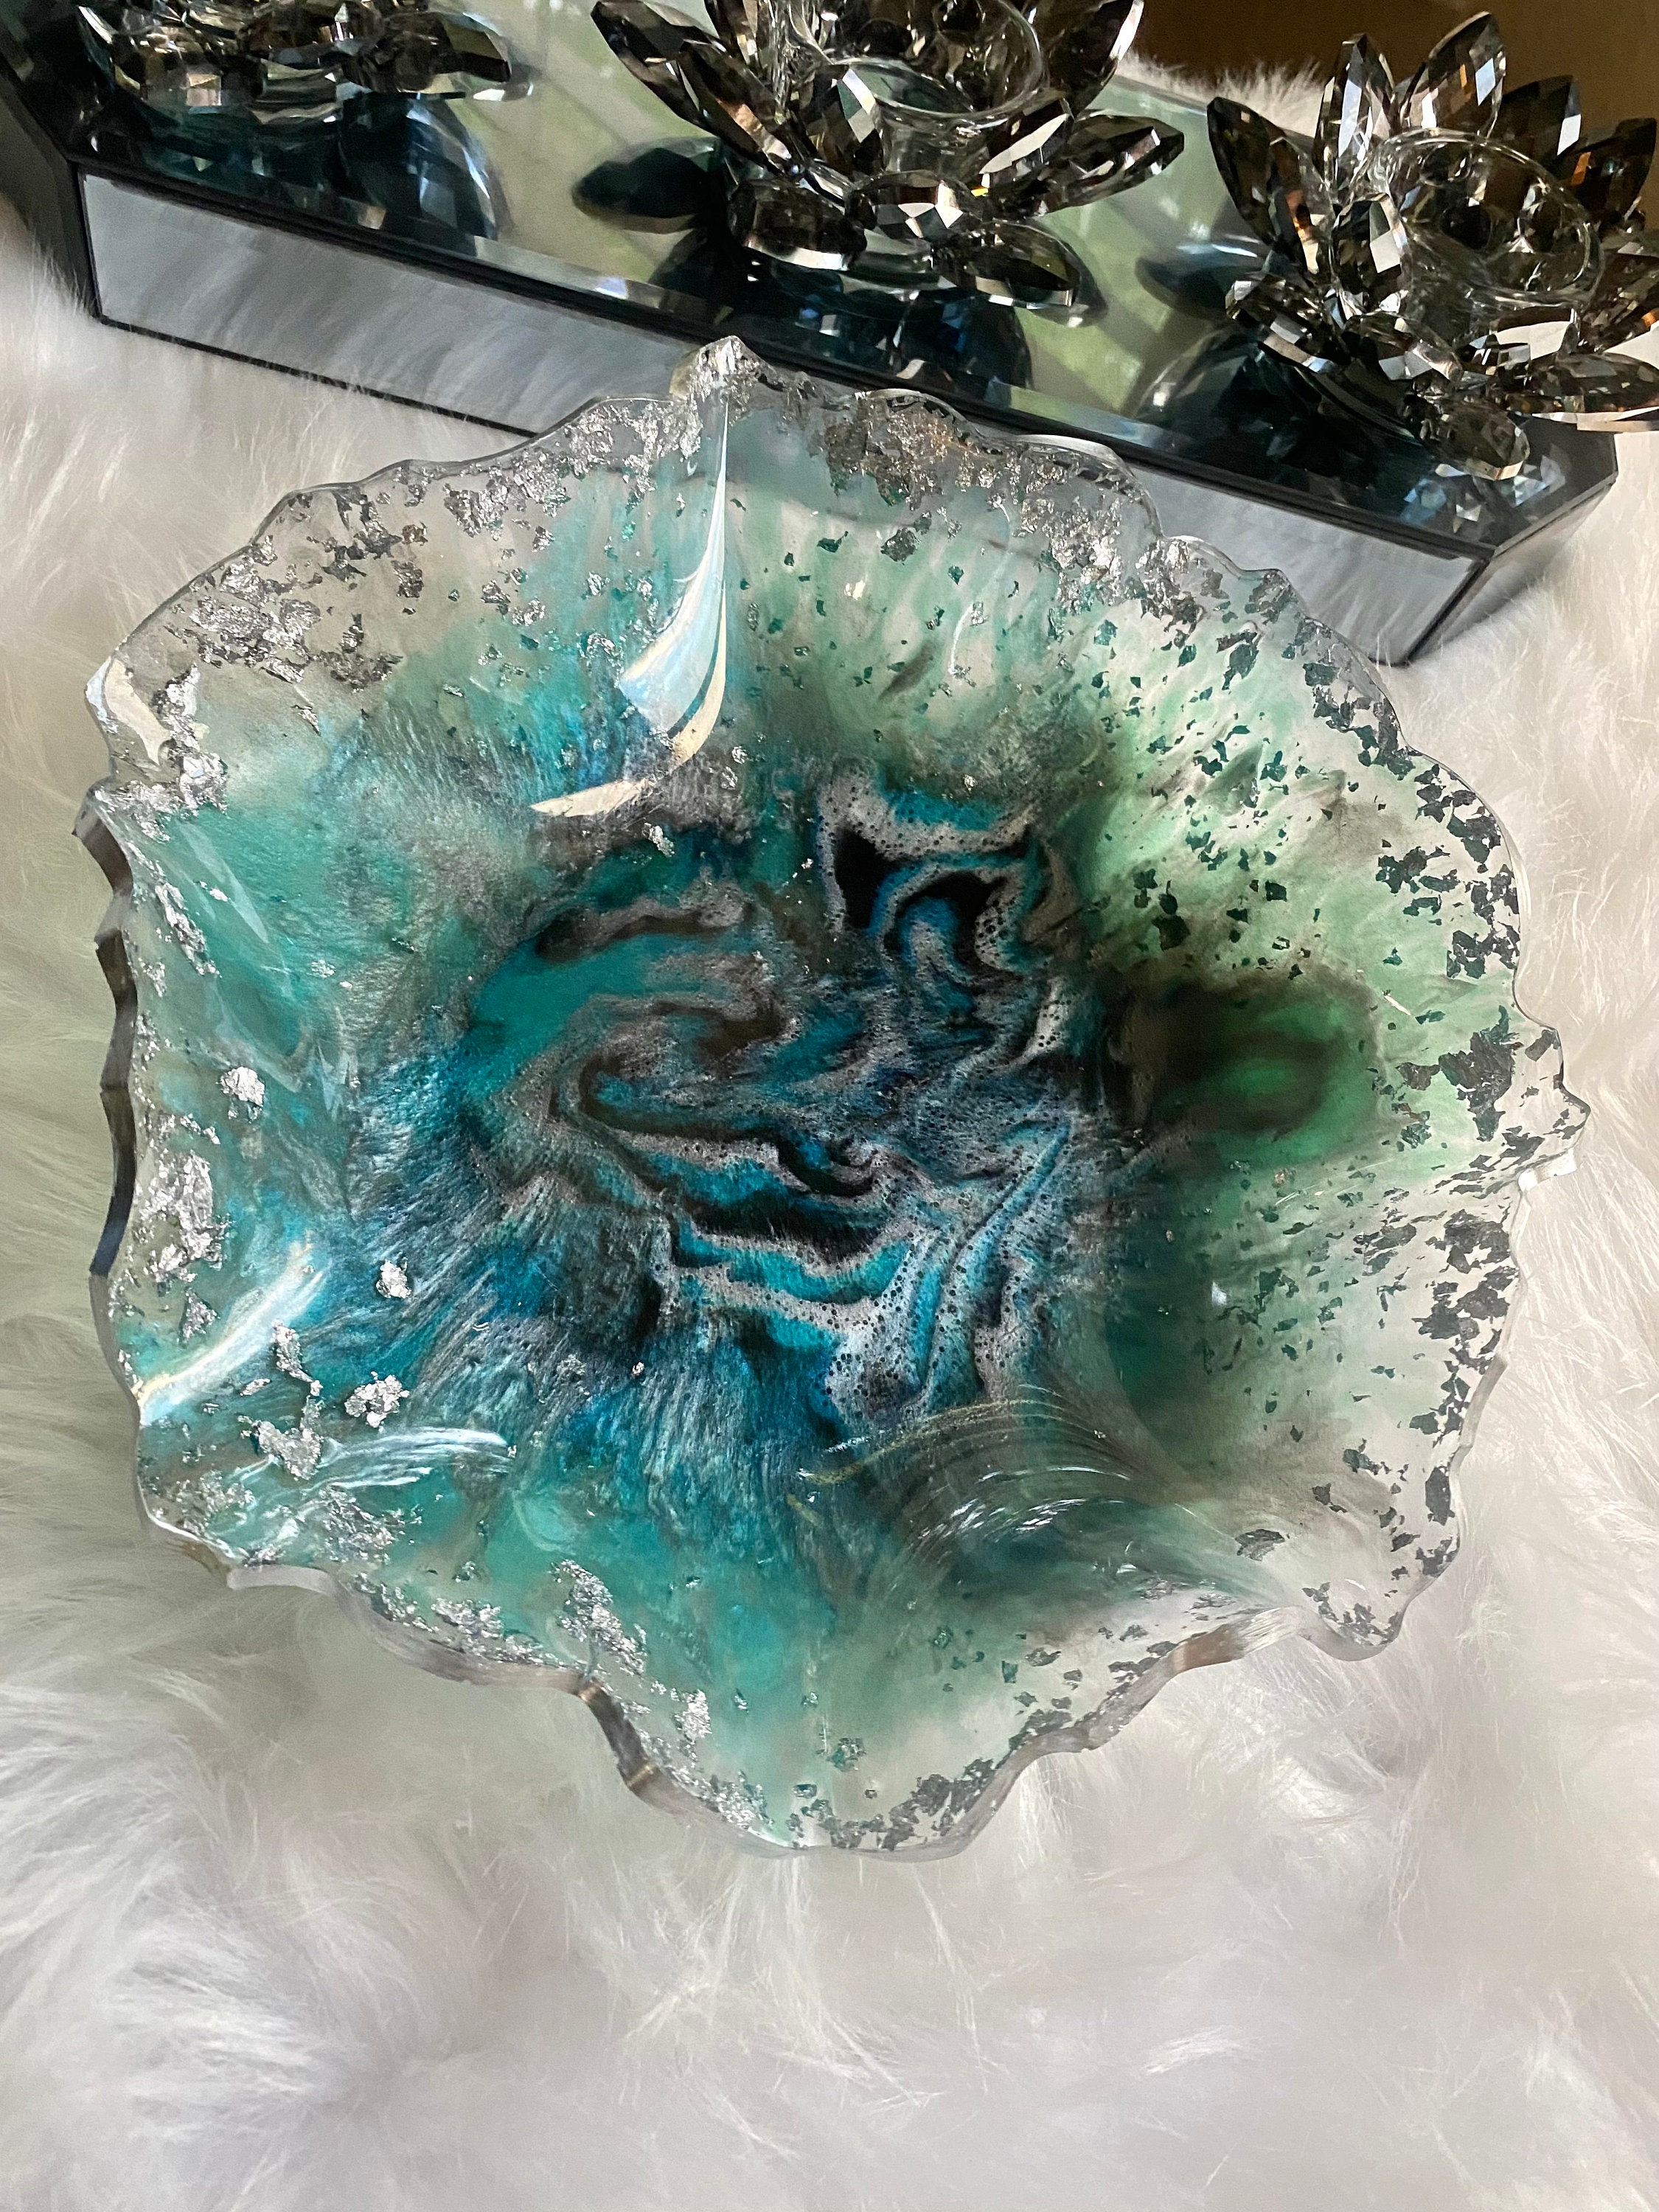 Resin trinket bowl: holographic, silver and vibrant color design